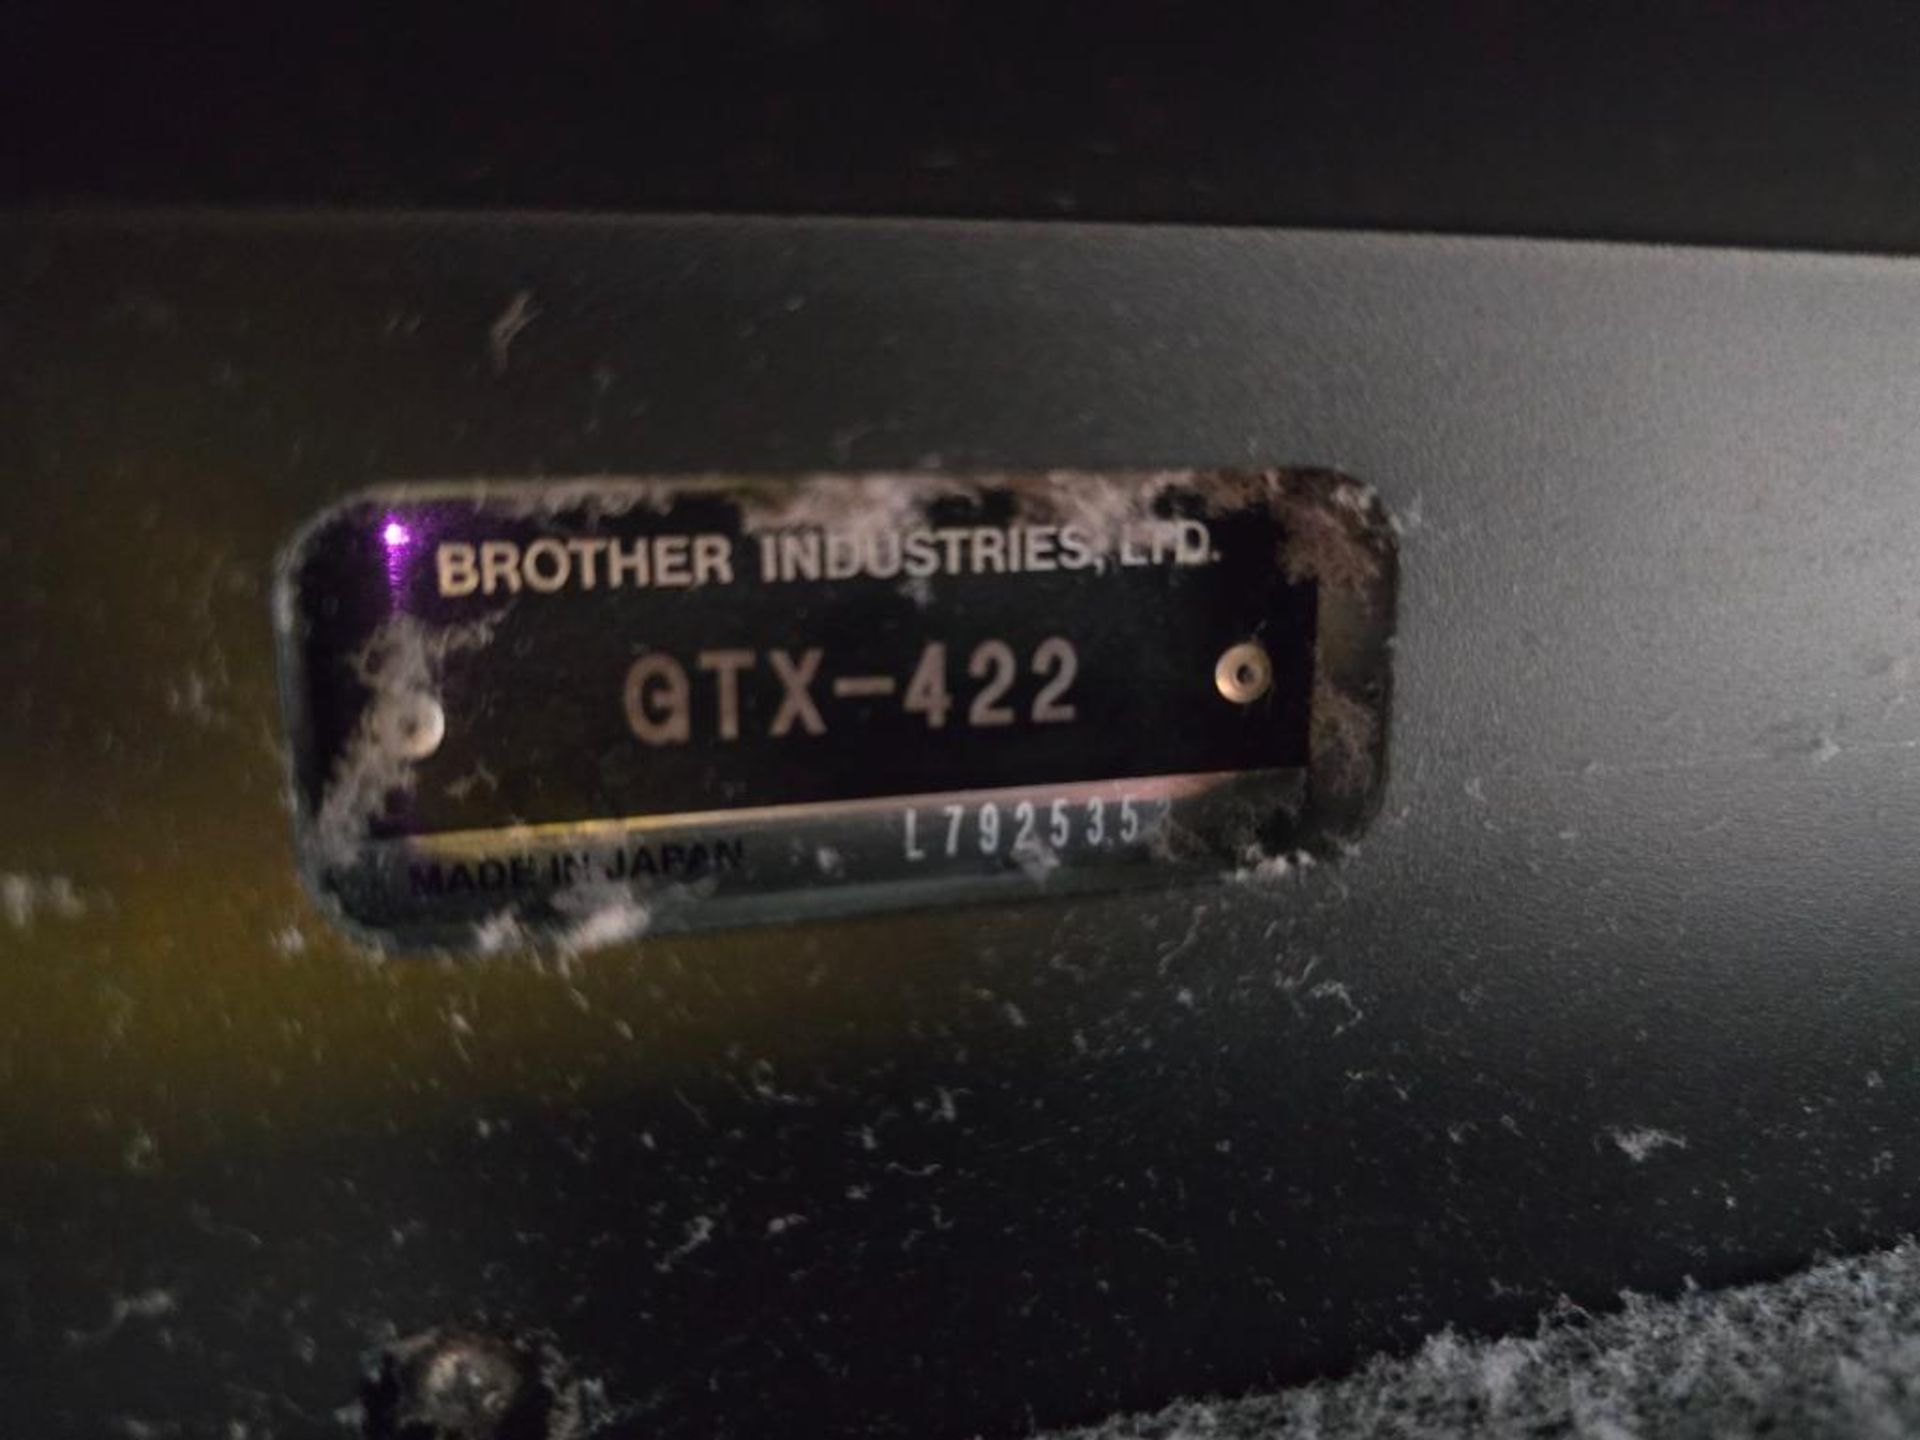 2018 Brother GTX-422 DTG (Direct to Garment) Printer, Twin Head, 6-Color, Water Based Pigmented Ink, - Image 7 of 8